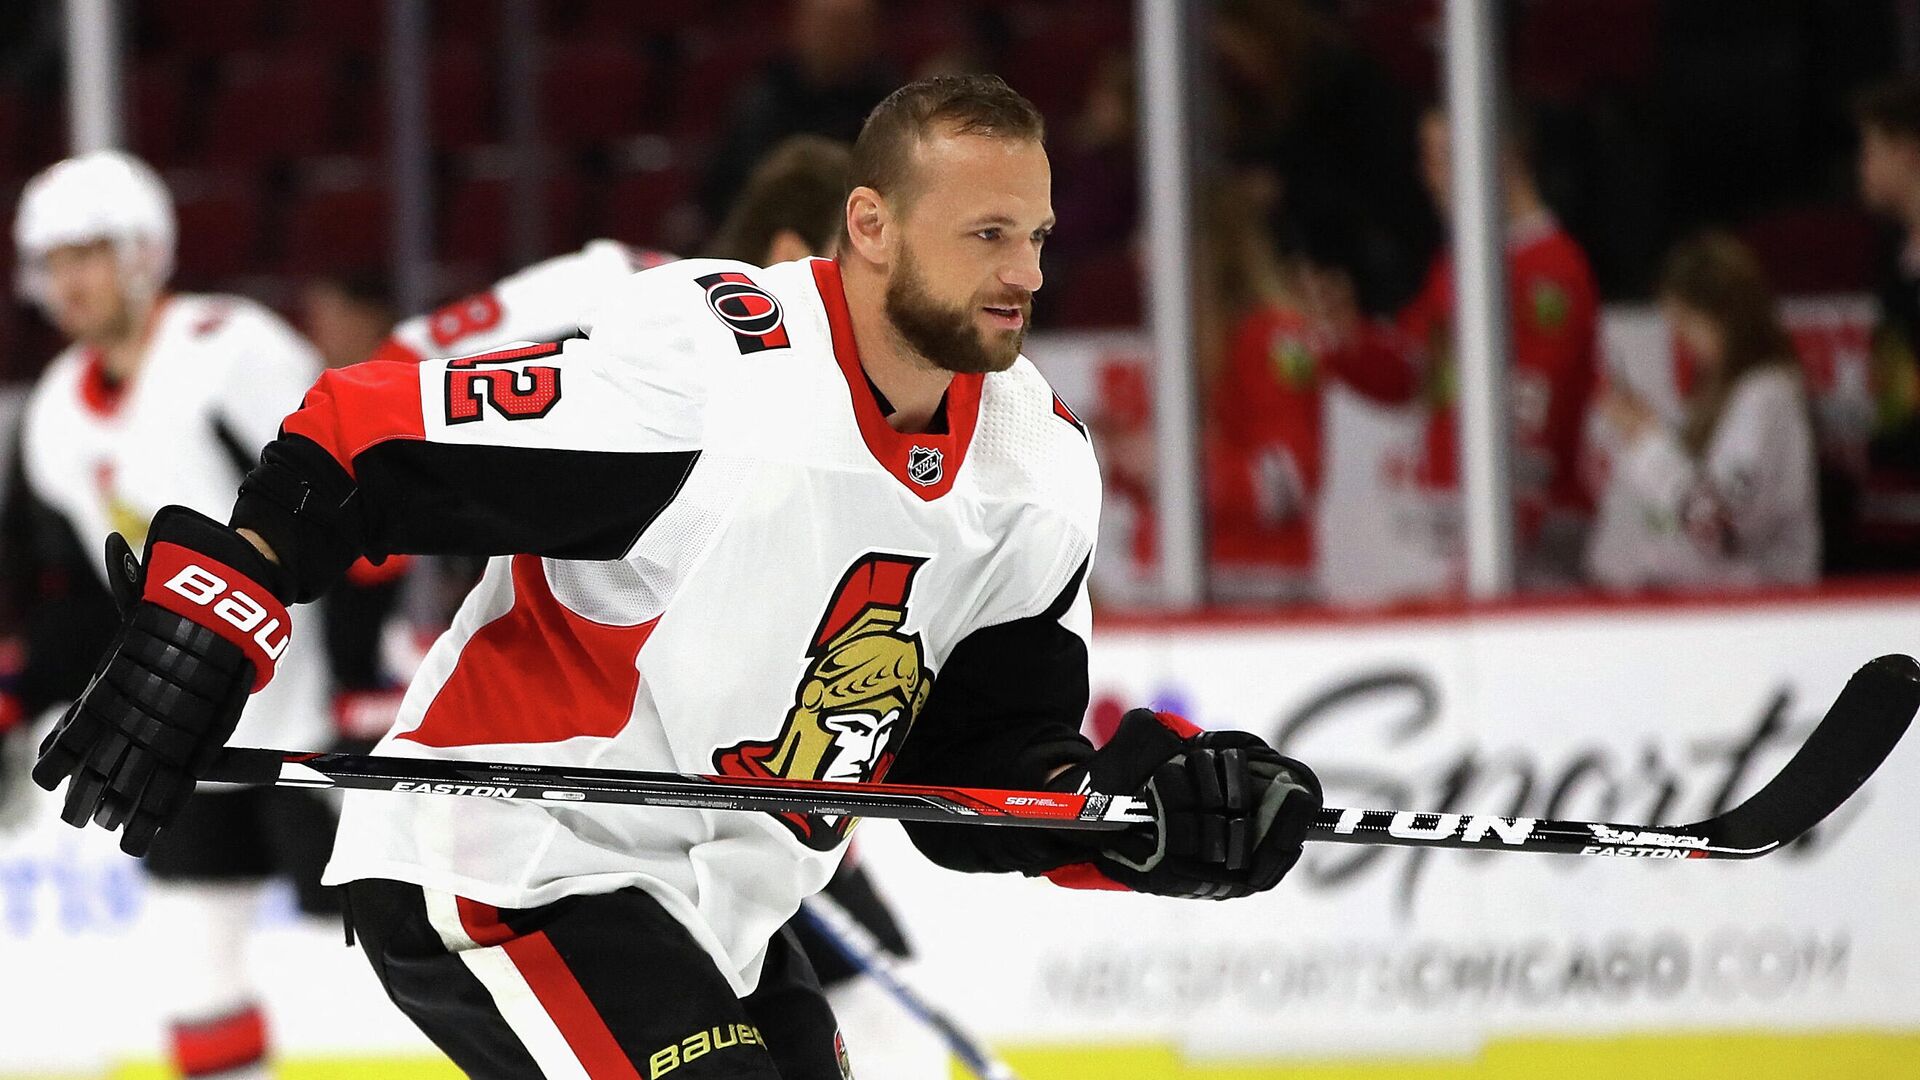 CHICAGO, IL - FEBRUARY 21: Marian Gaborik #12 of the Ottawa Senators participates in warm-ups before a game against the Chicago Blackhawks at the United Center on February 21, 2018 in Chicago, Illinois.   Jonathan Daniel/Getty Images/AFP (Photo by JONATHAN DANIEL / GETTY IMAGES NORTH AMERICA / Getty Images via AFP) - РИА Новости, 1920, 04.11.2021